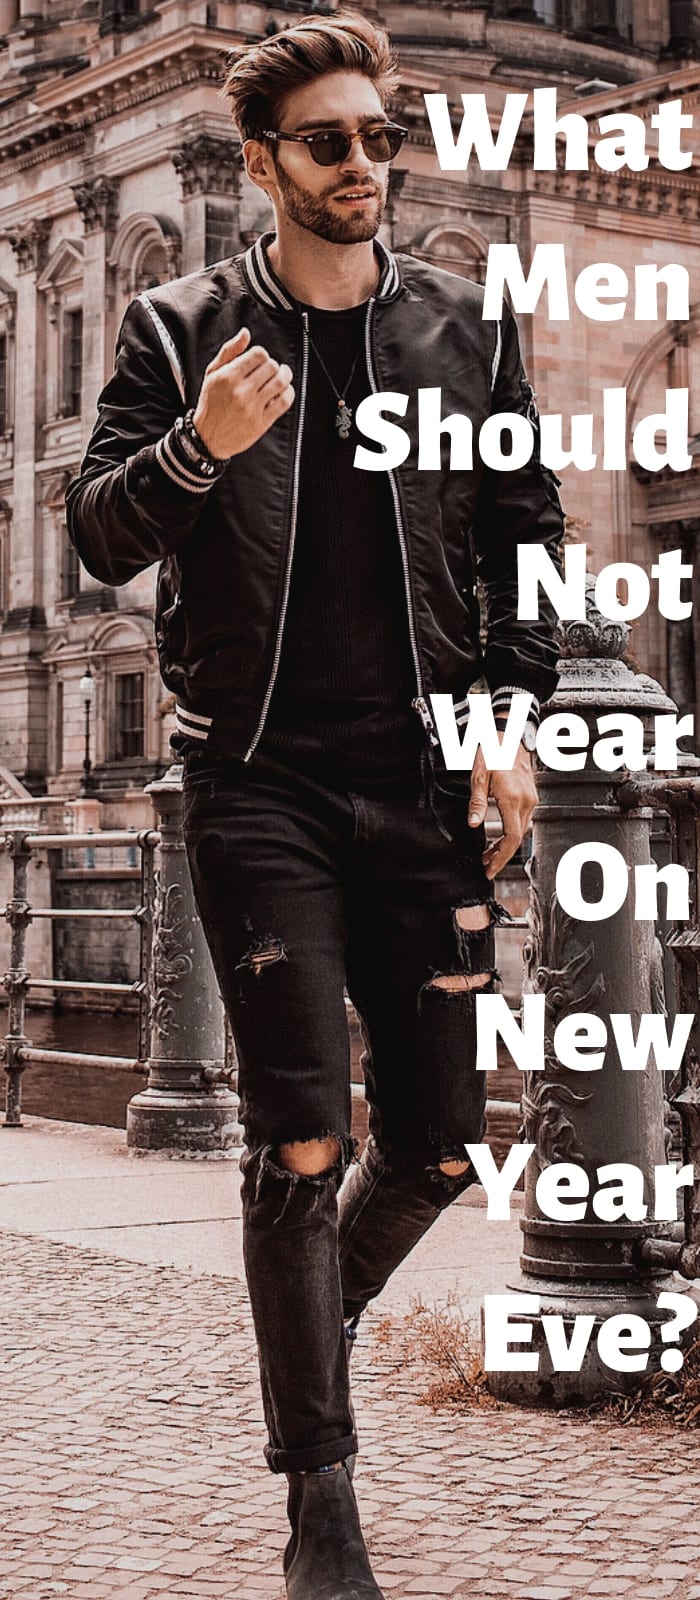 what men should not wear on New Year Eve